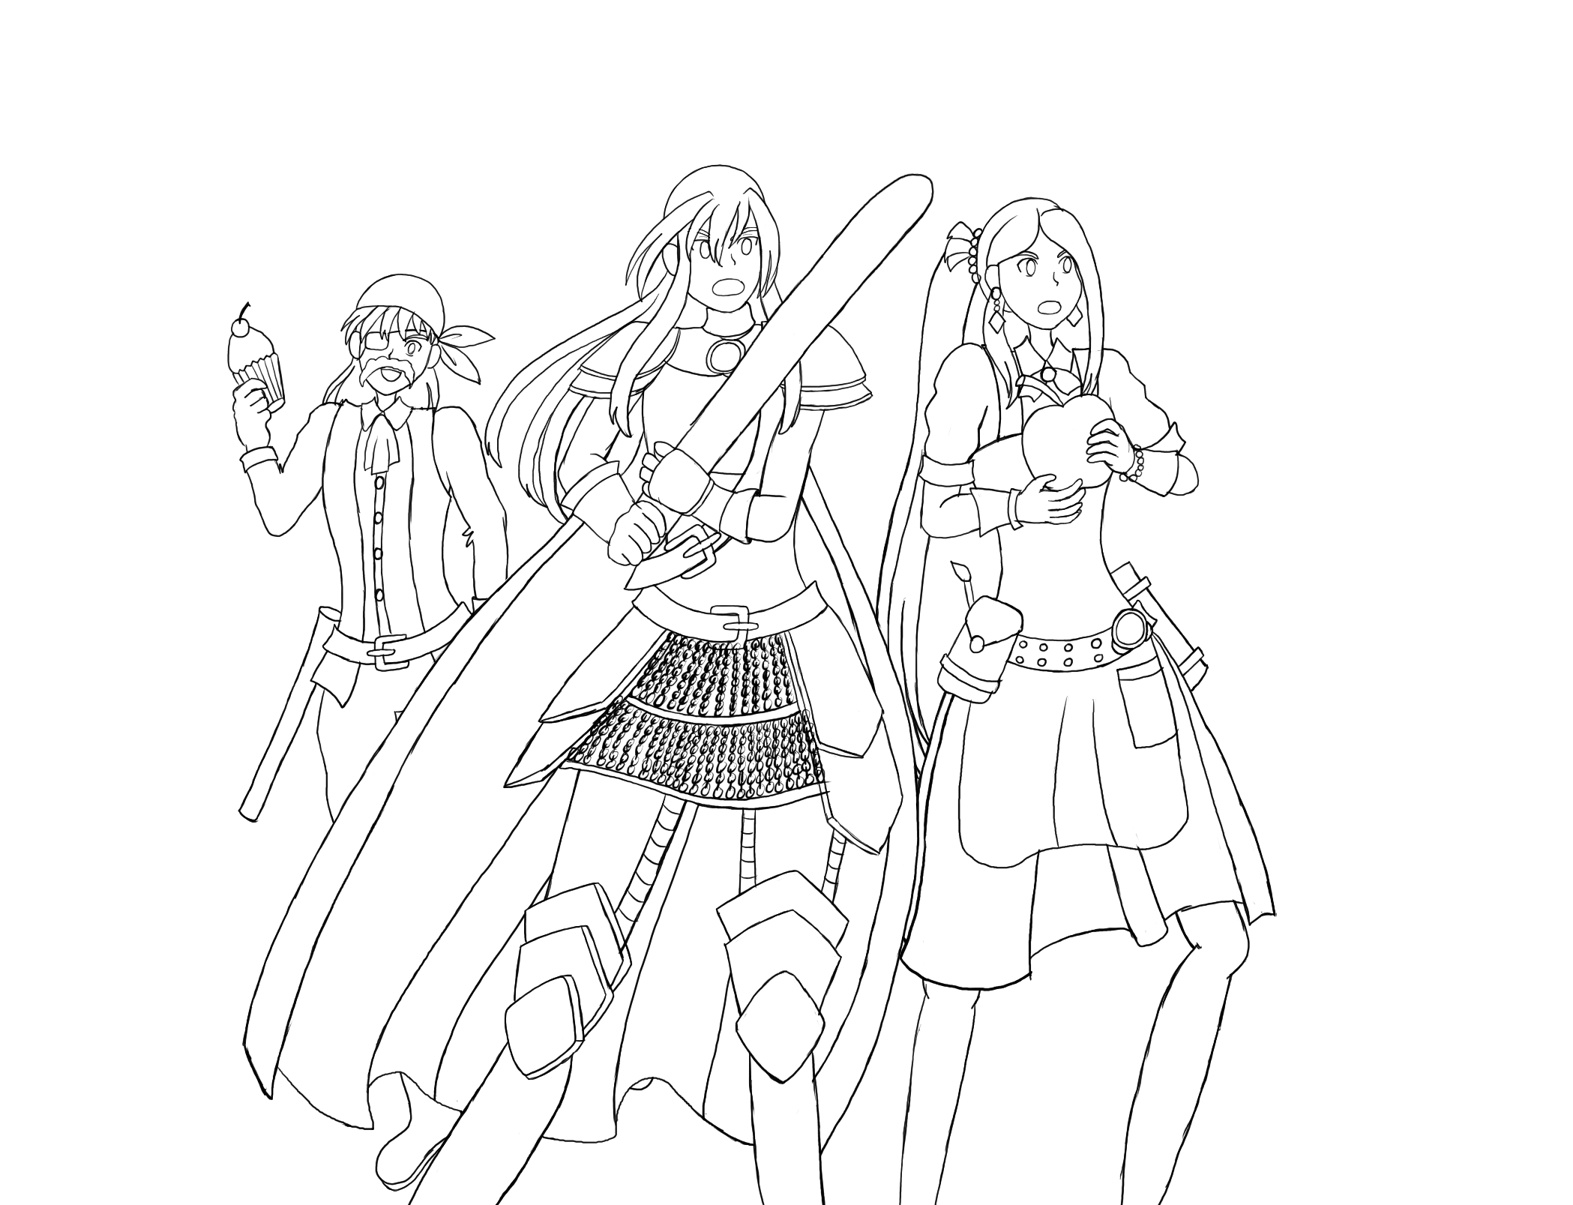 Image description: A line art drawing showing 3 characters. One is dressed as a pirate and holding a cupcake as a weapon. The character in the middle is dressed as a knight and wielding a baguette. The character to the right is dressed like an artisan and is holding a cannonball-sized apple